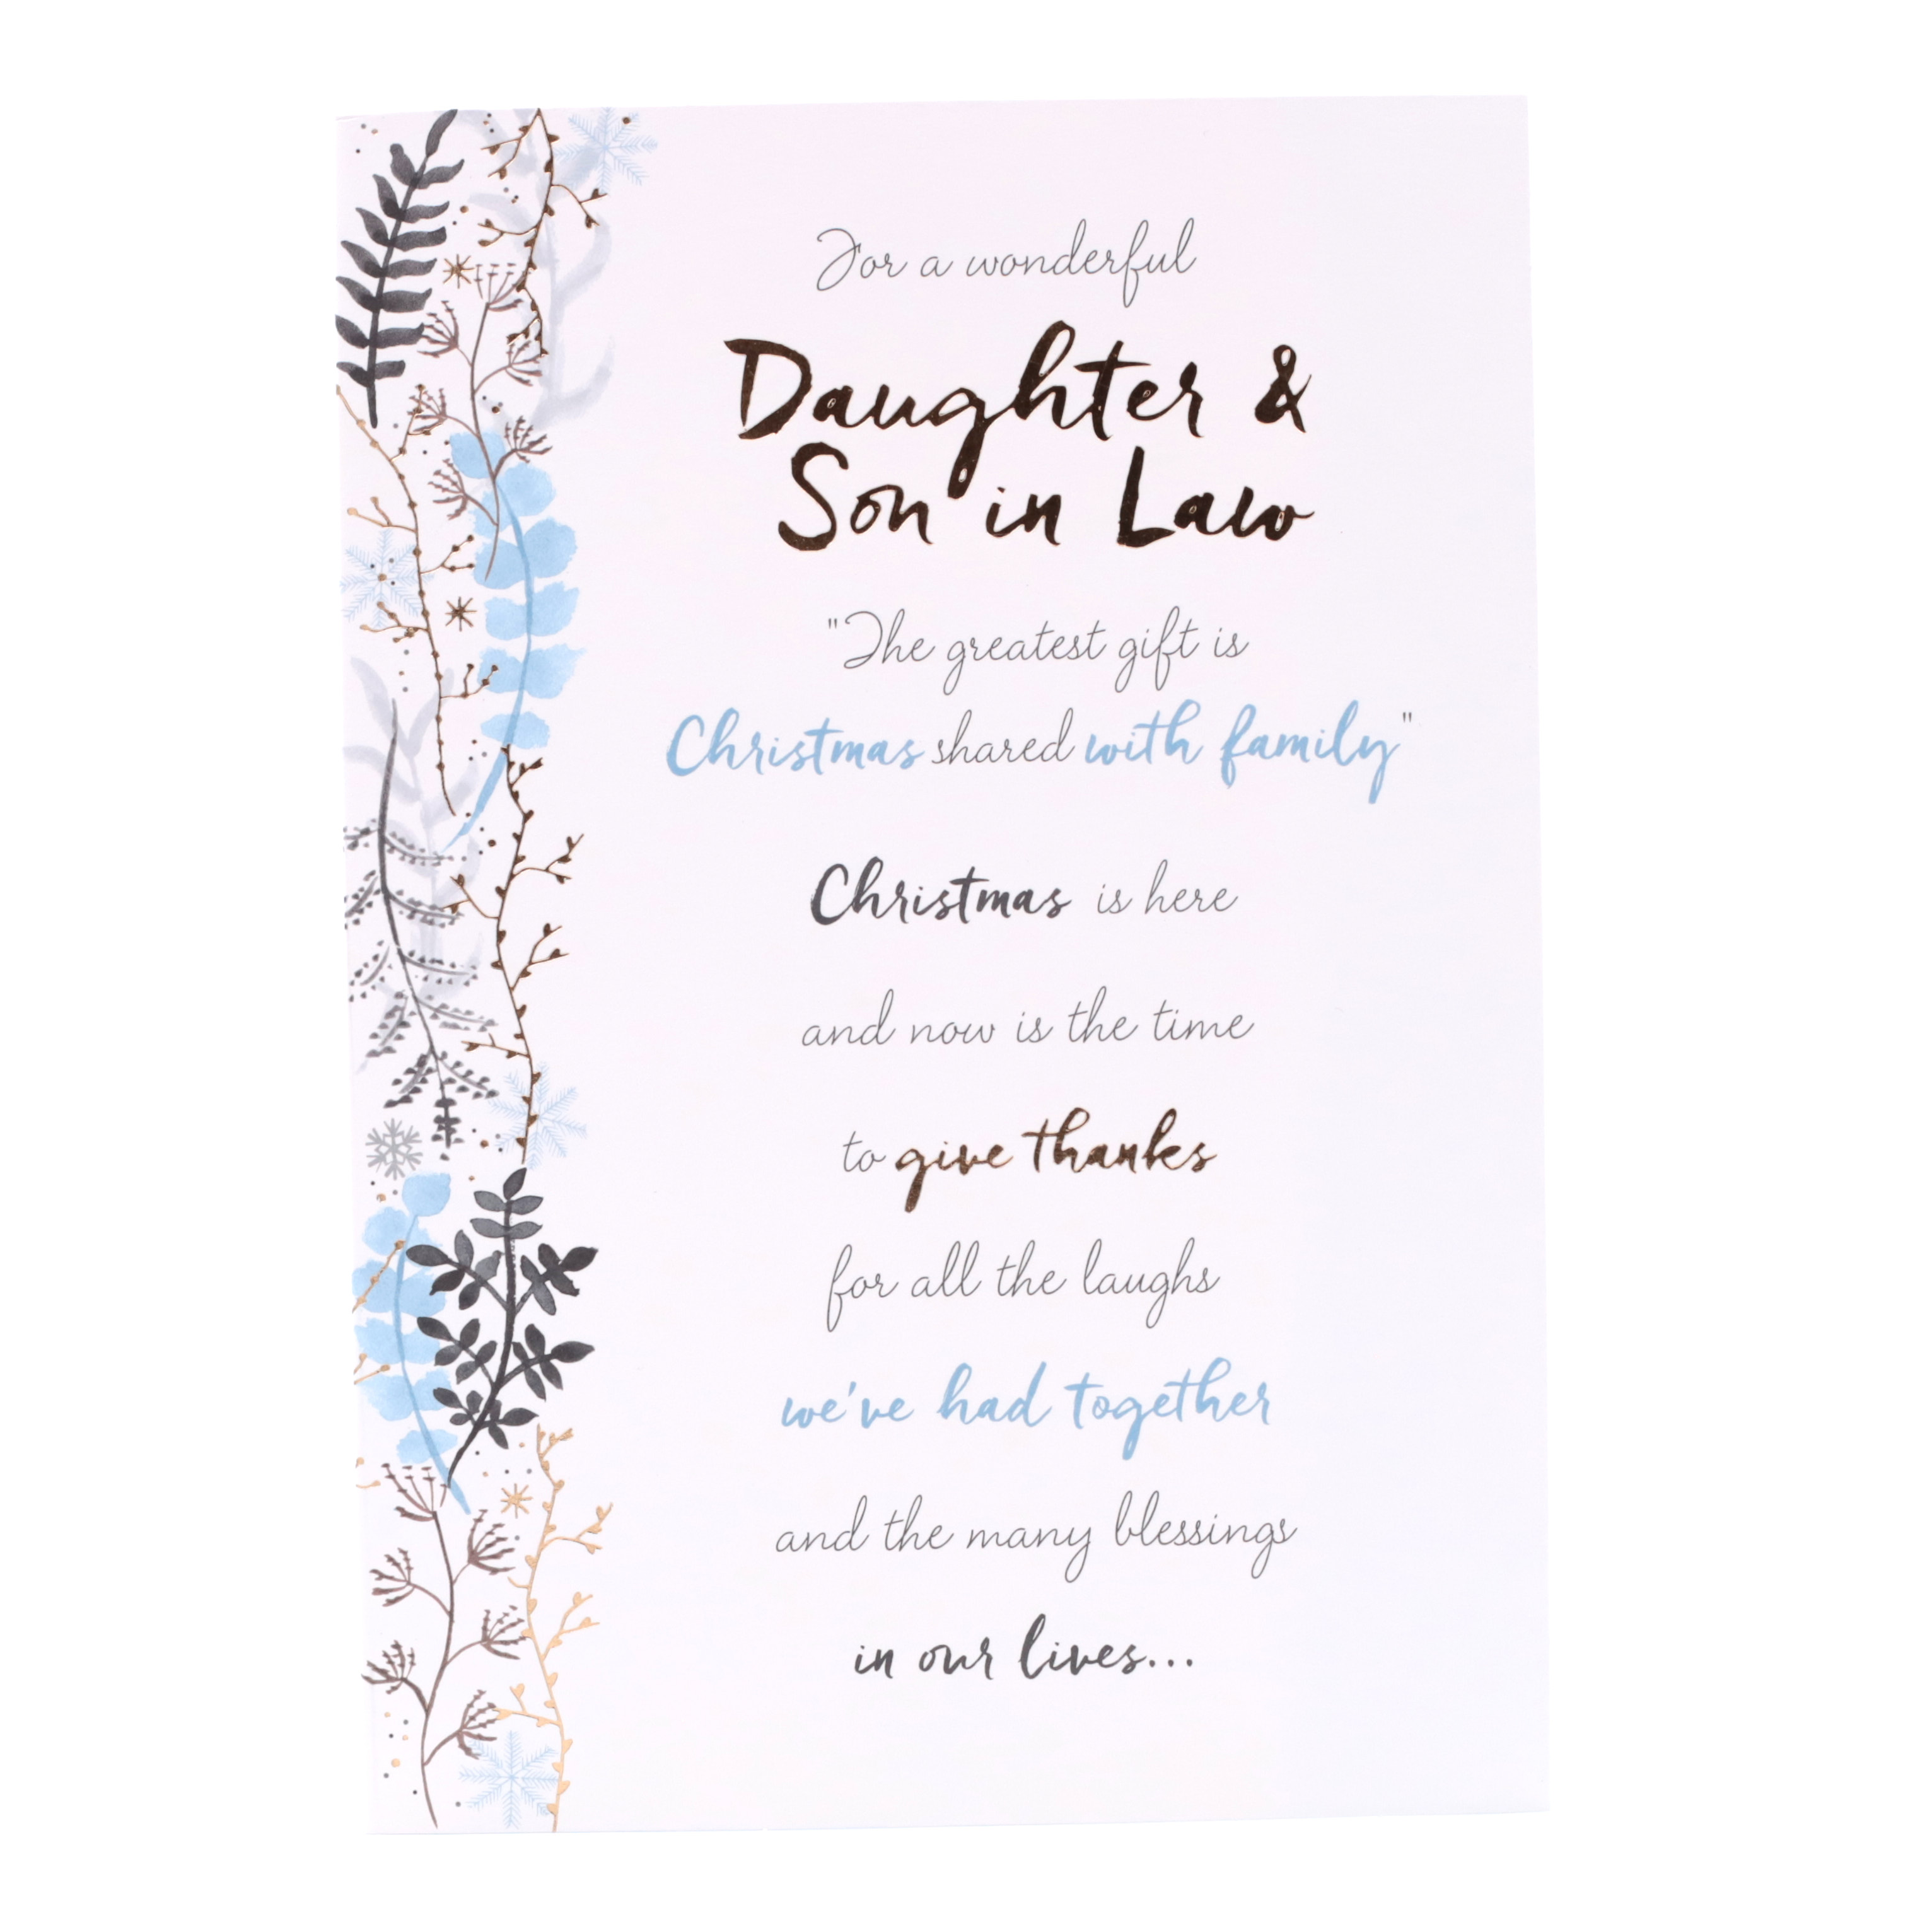 Christmas Card - Wonderful Daughter And Son In Law, Traditional Verse